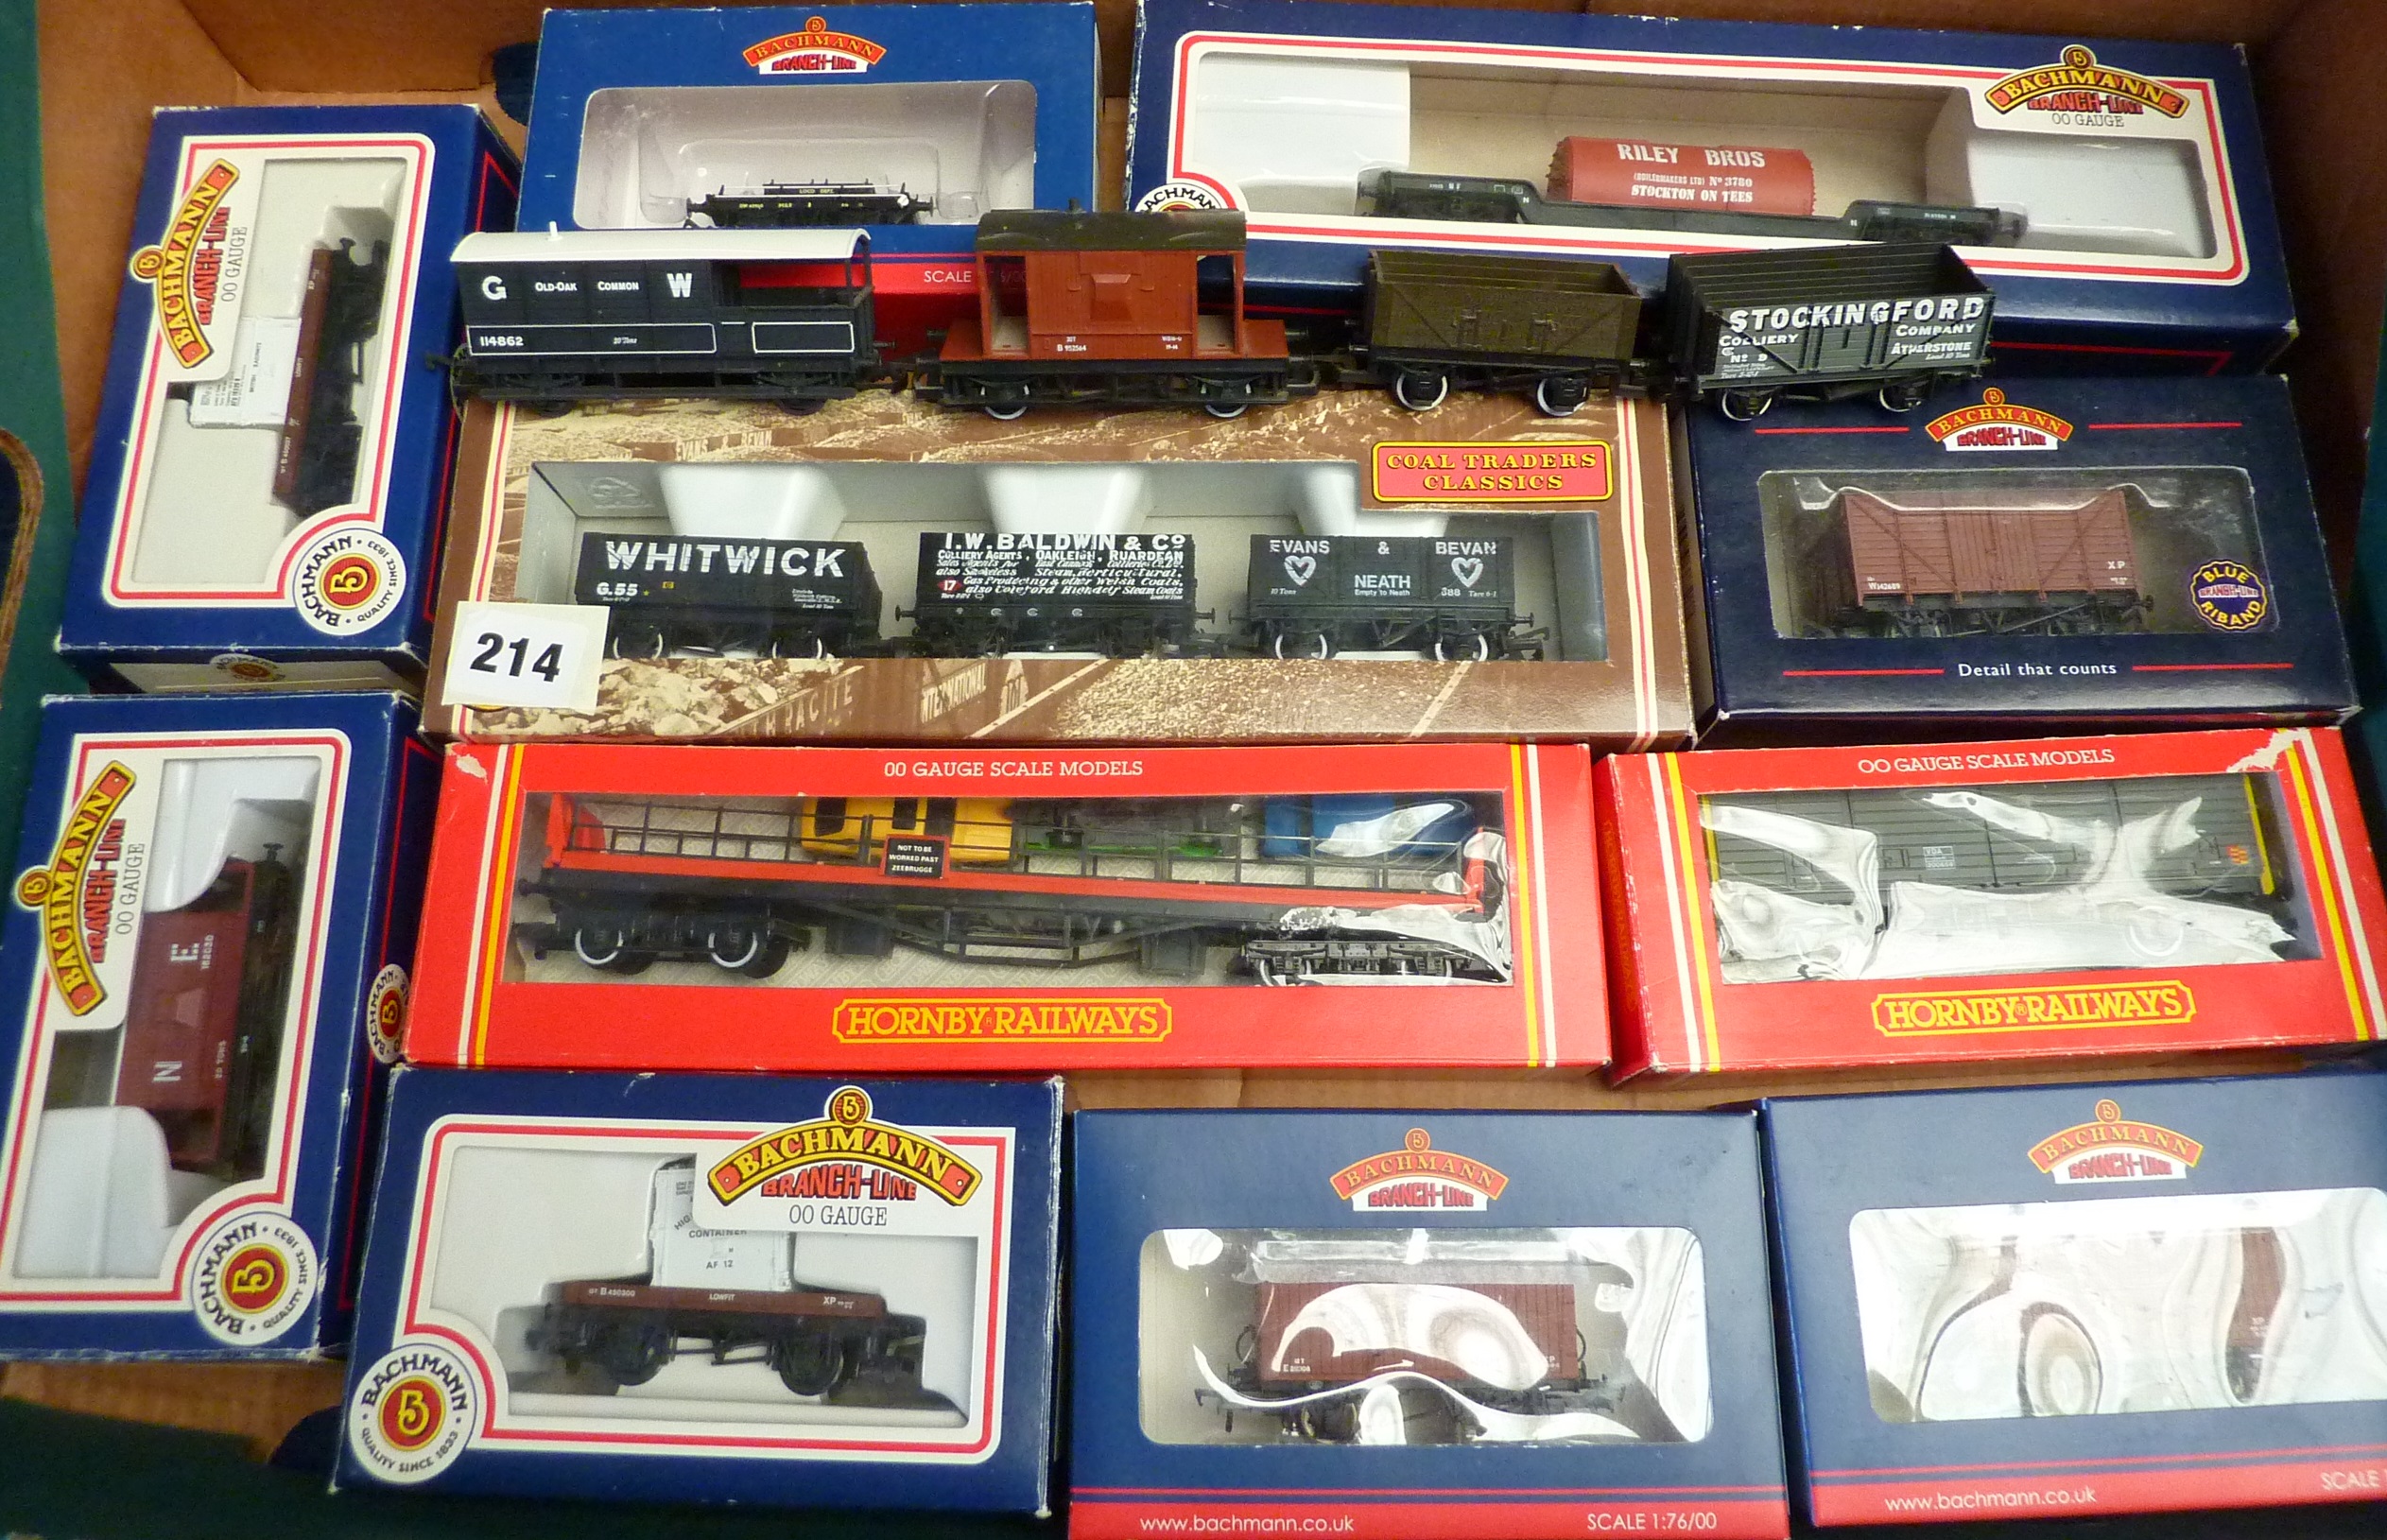 MODEL RAILWAY 11 BOXED BACHMANN AND HORNBY WAGONS, MOSTLY PRIVATE OWNER